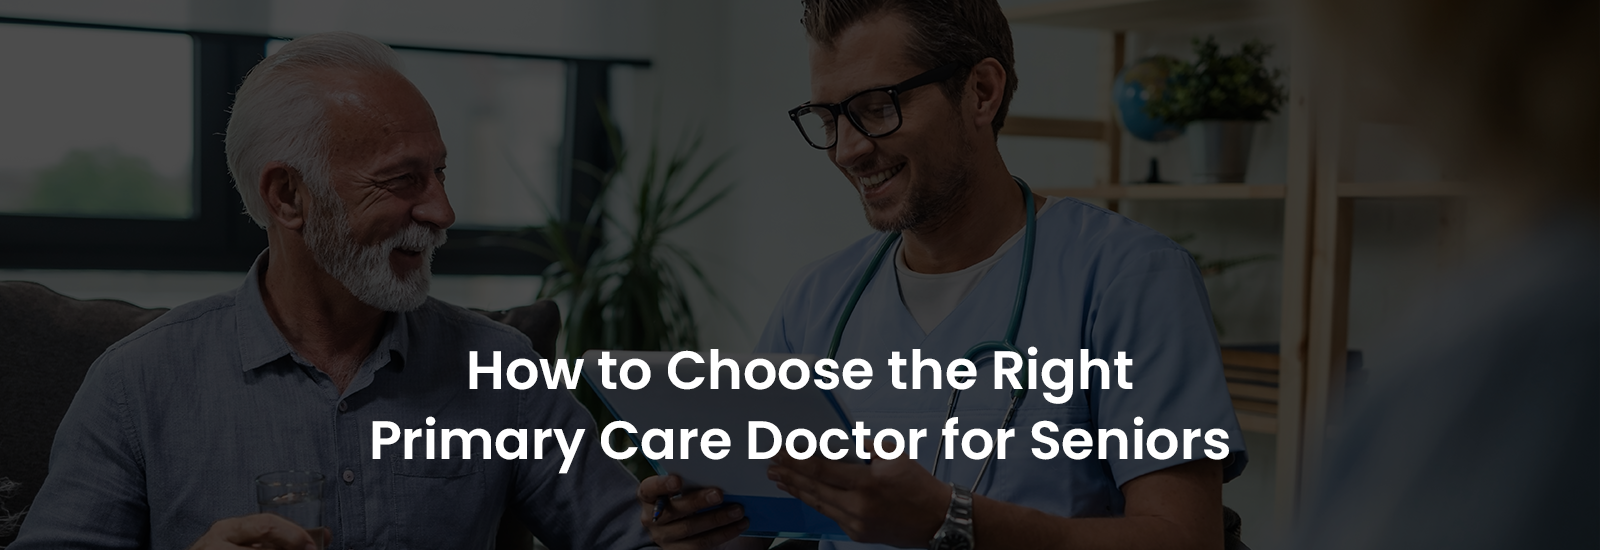 How to Choose the Right Primary Care Doctor for Seniors | Banner Image